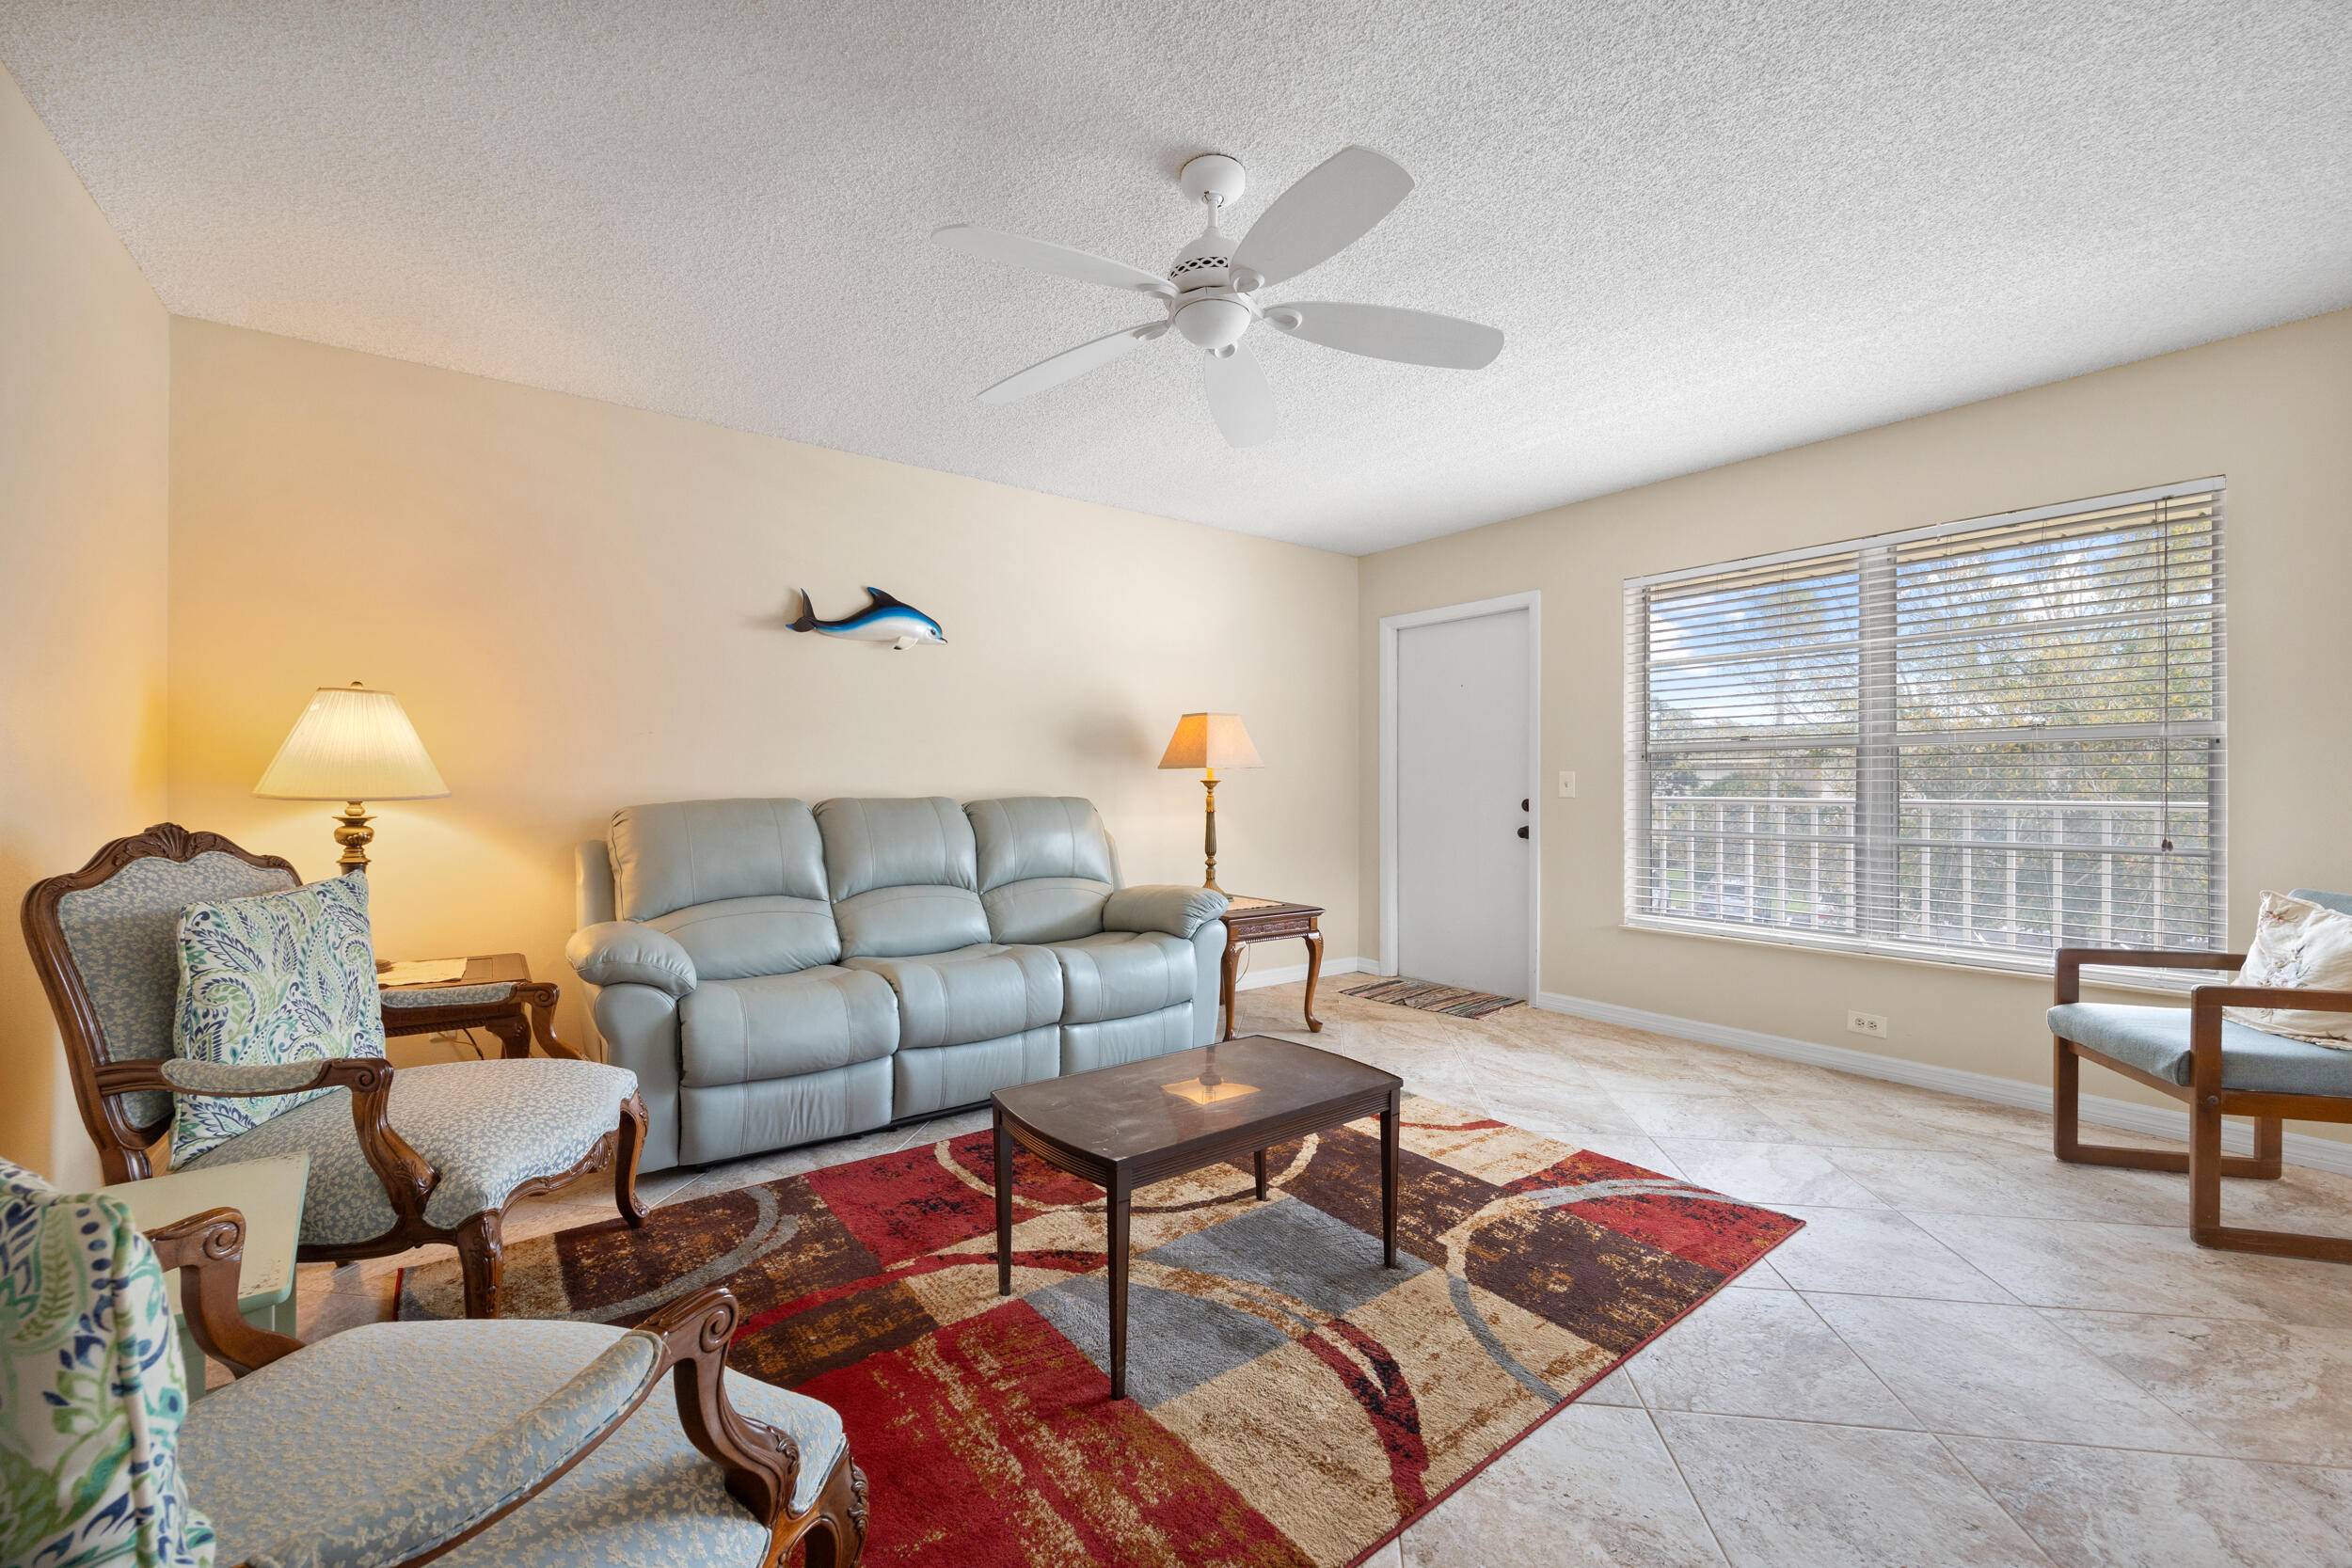 Welcome to this cheerful and renovated 2 bedroom, 2 bathroom condo in the heart of Vero Beach.